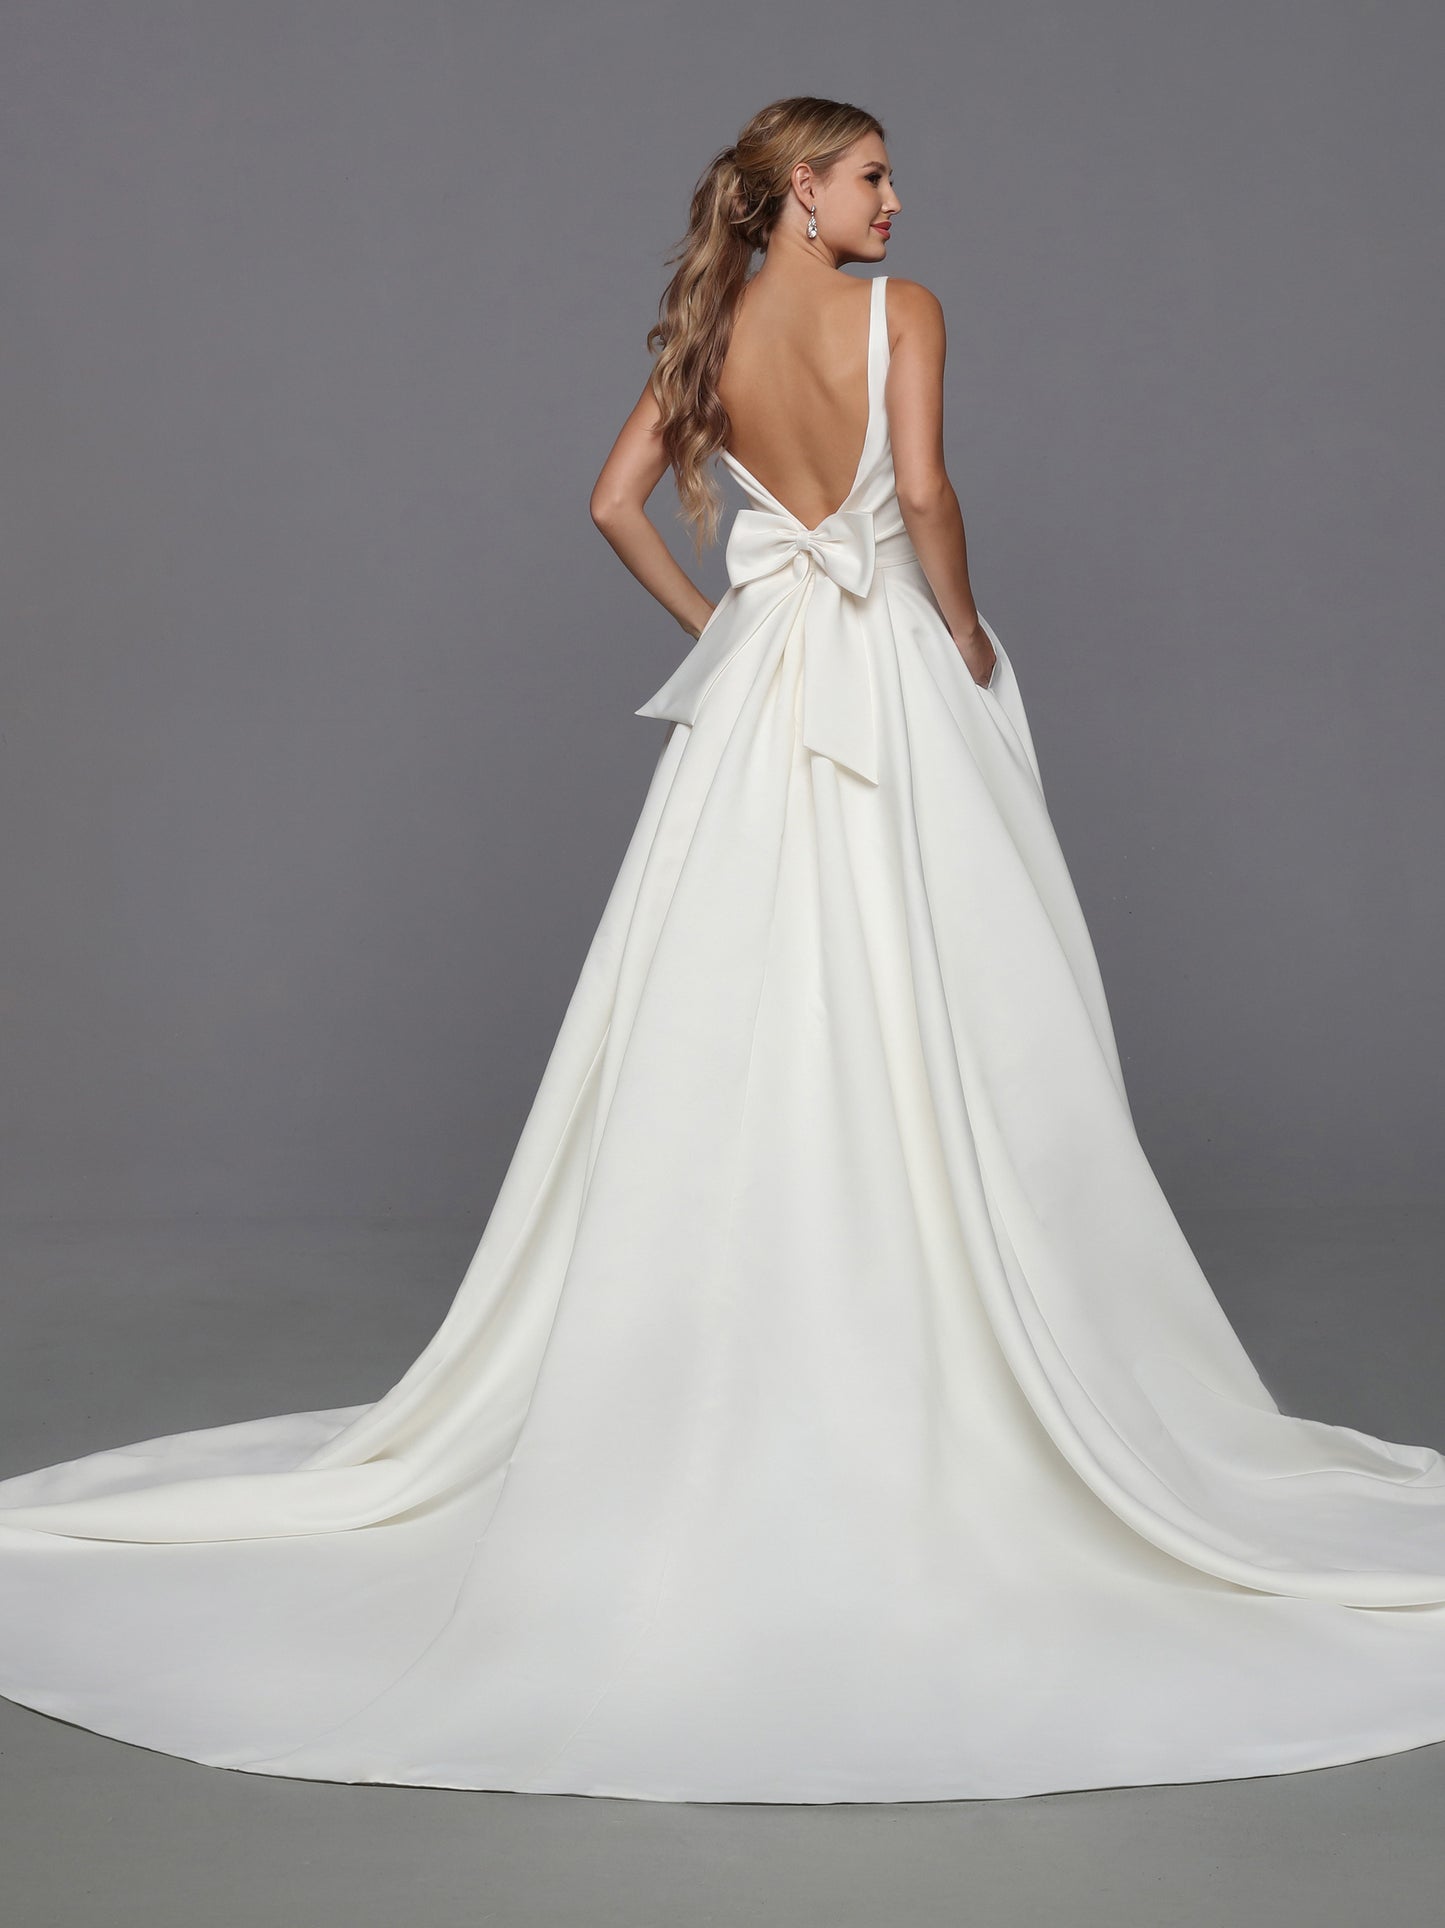 DaVinci Bridal 50766 A-Line Ballgown Satin Open Back Pockets Bow Train Wedding Gown. This feminine satin ball gown features lovely on-trend updates. The faux-wrap bodice has a waist-deep V-back accented with a removable oversized bow.